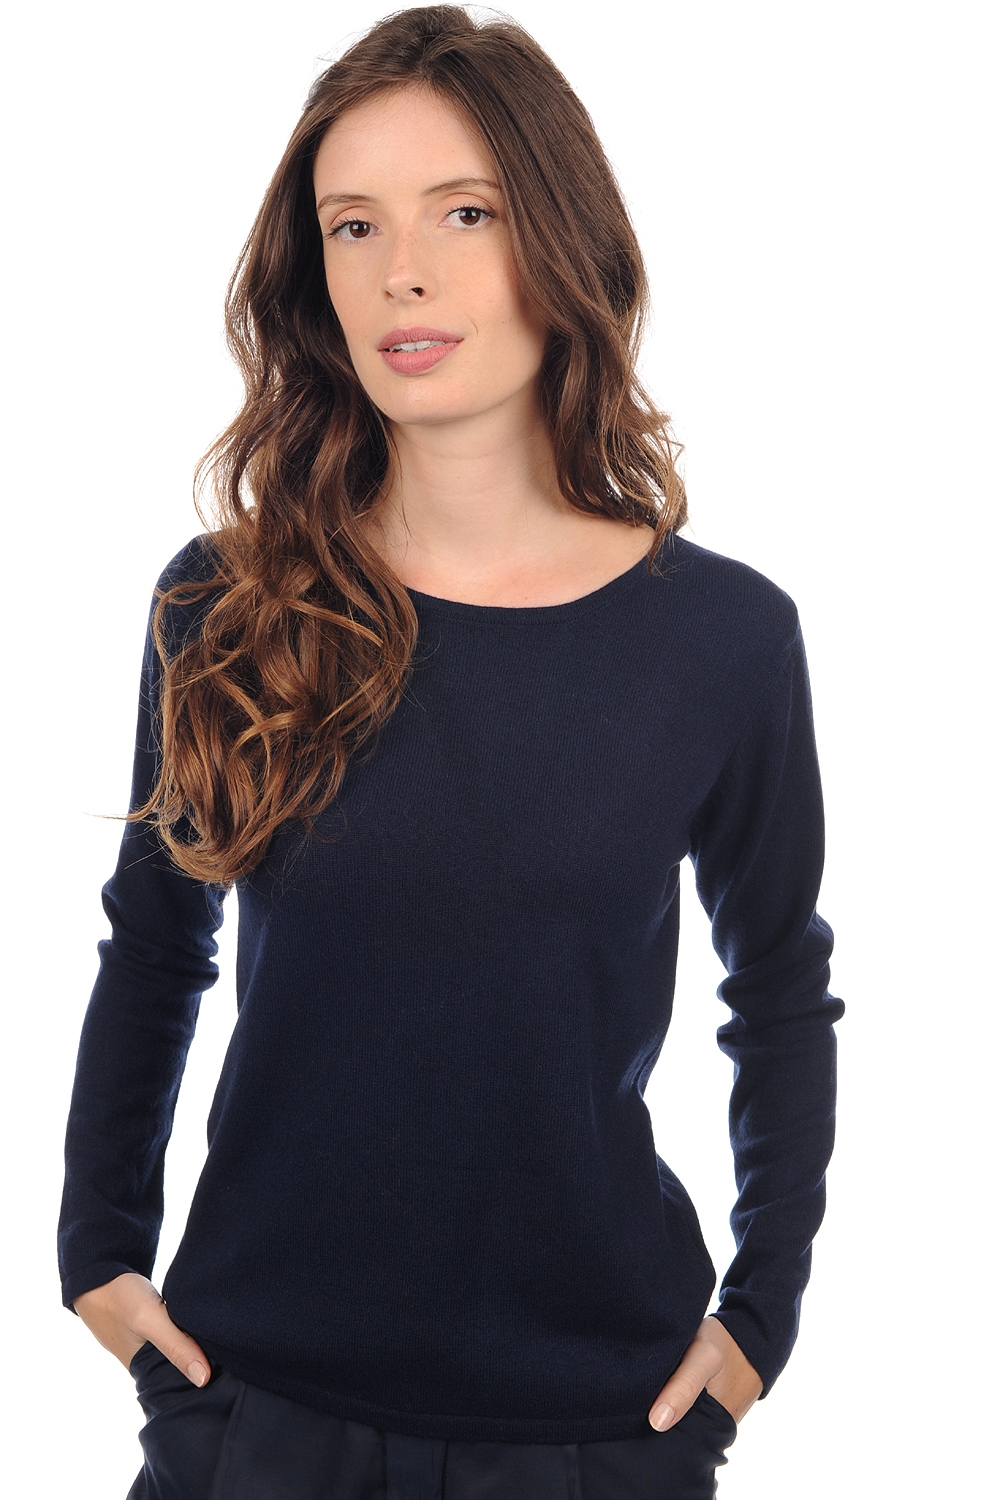 Cachemire pull femme col rond solange marine fonce 3xl